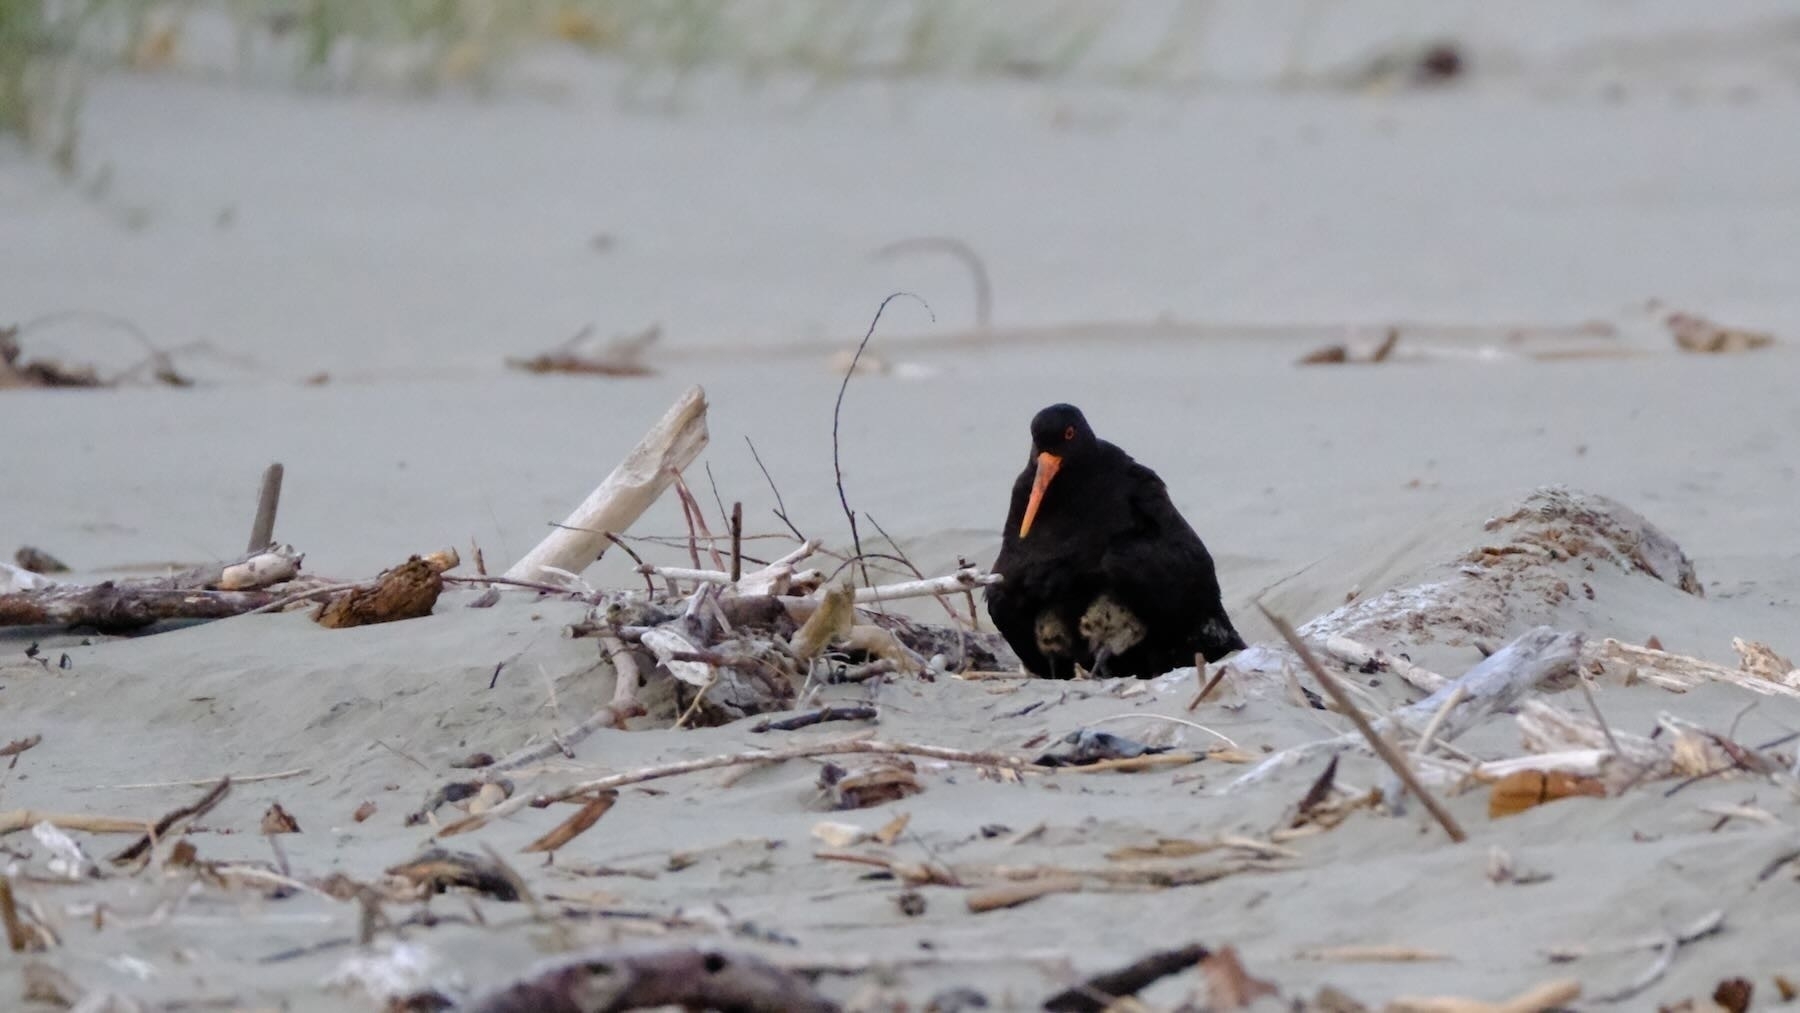 Oystercatcher chicks seek refuge under their parent. Can you see their bottoms peeking out? 